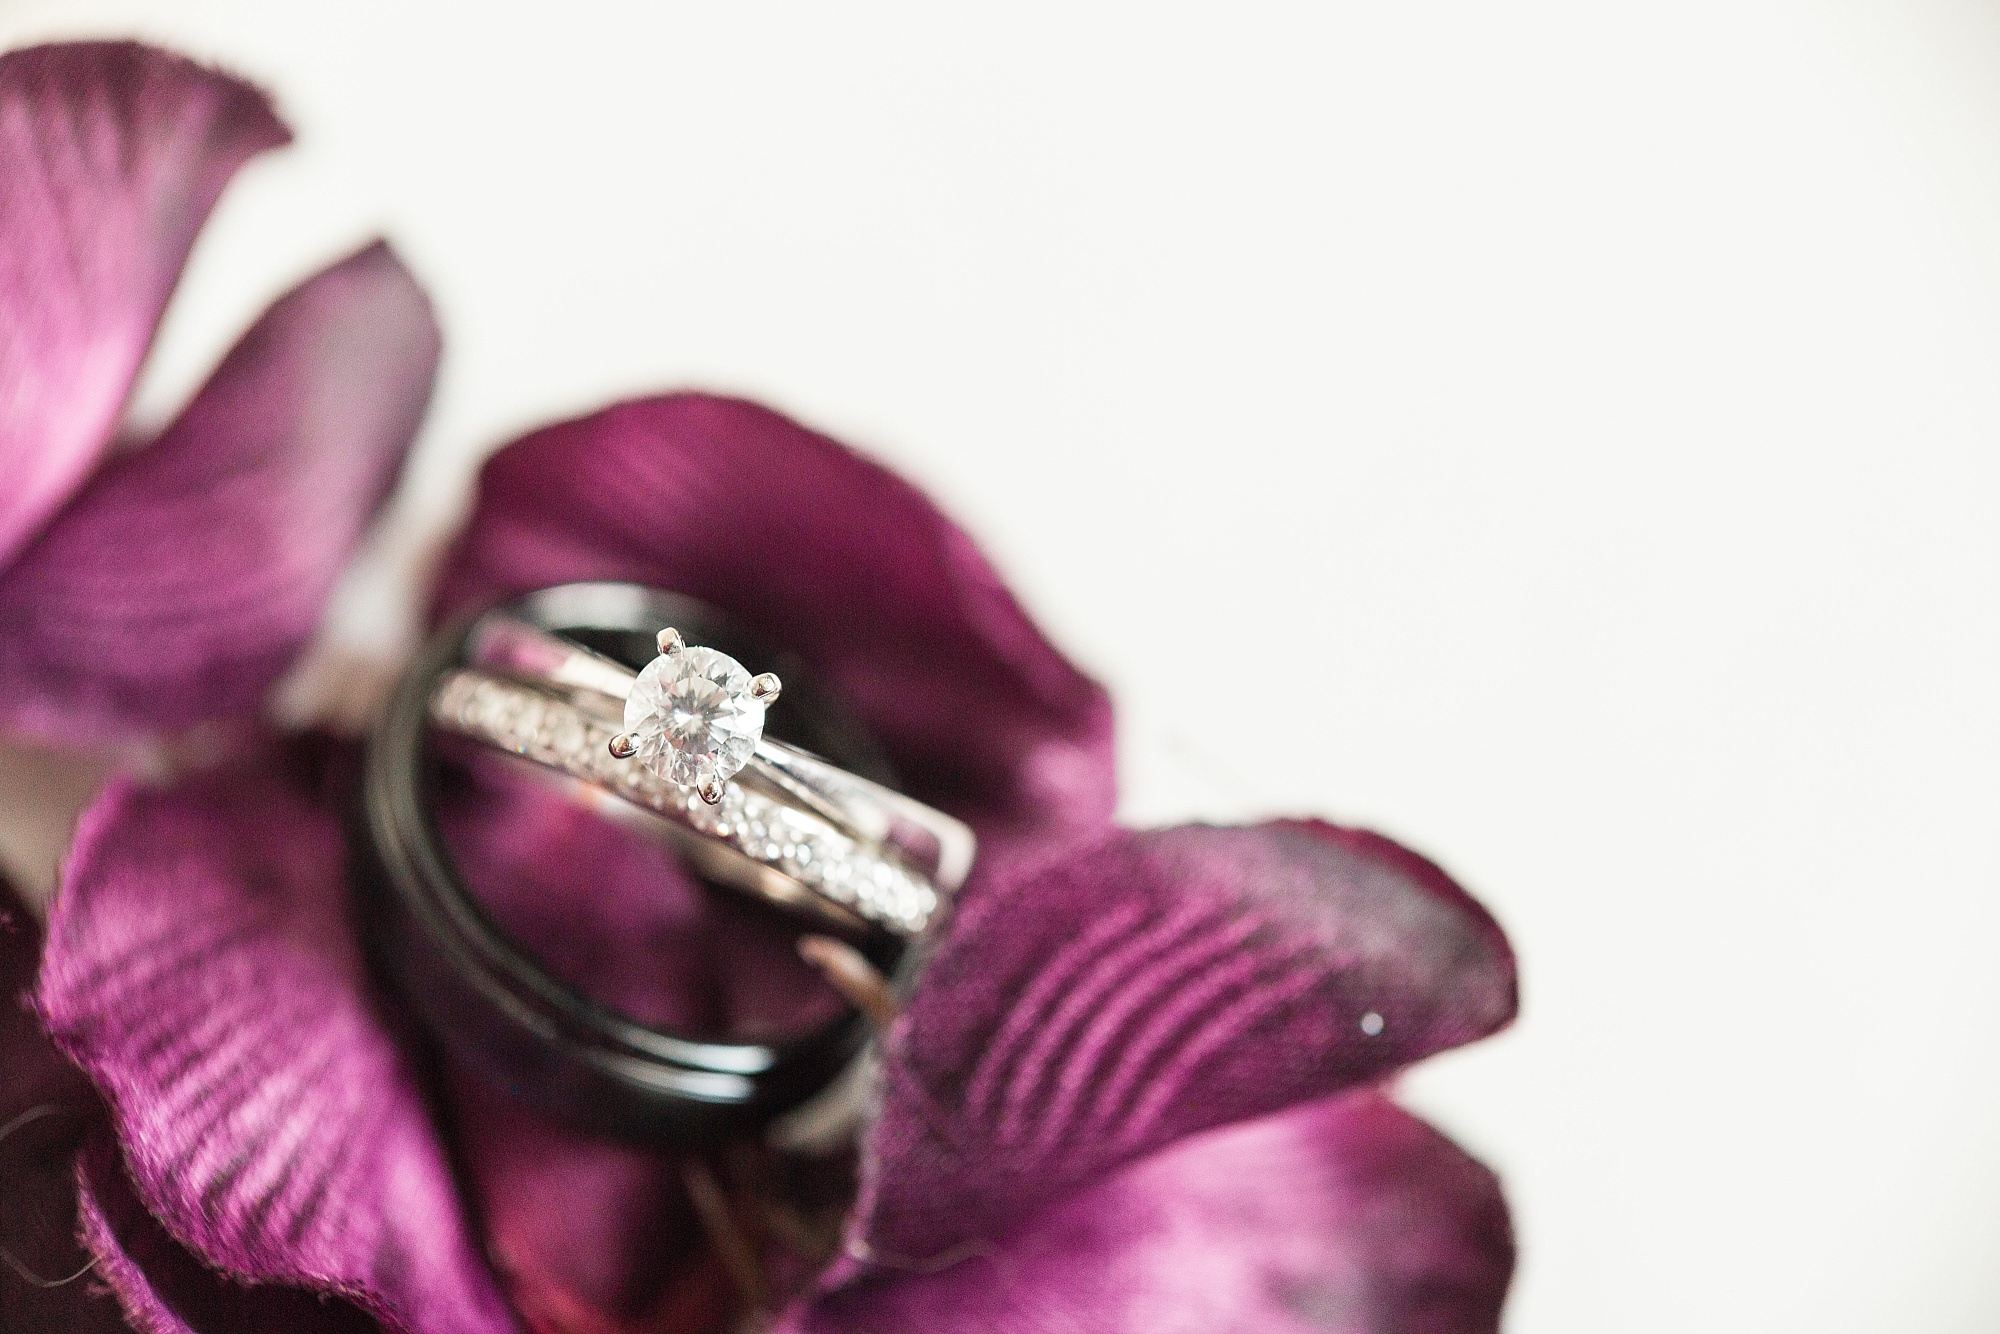 White gold wedding ring set sits on a bed of purple flower petals